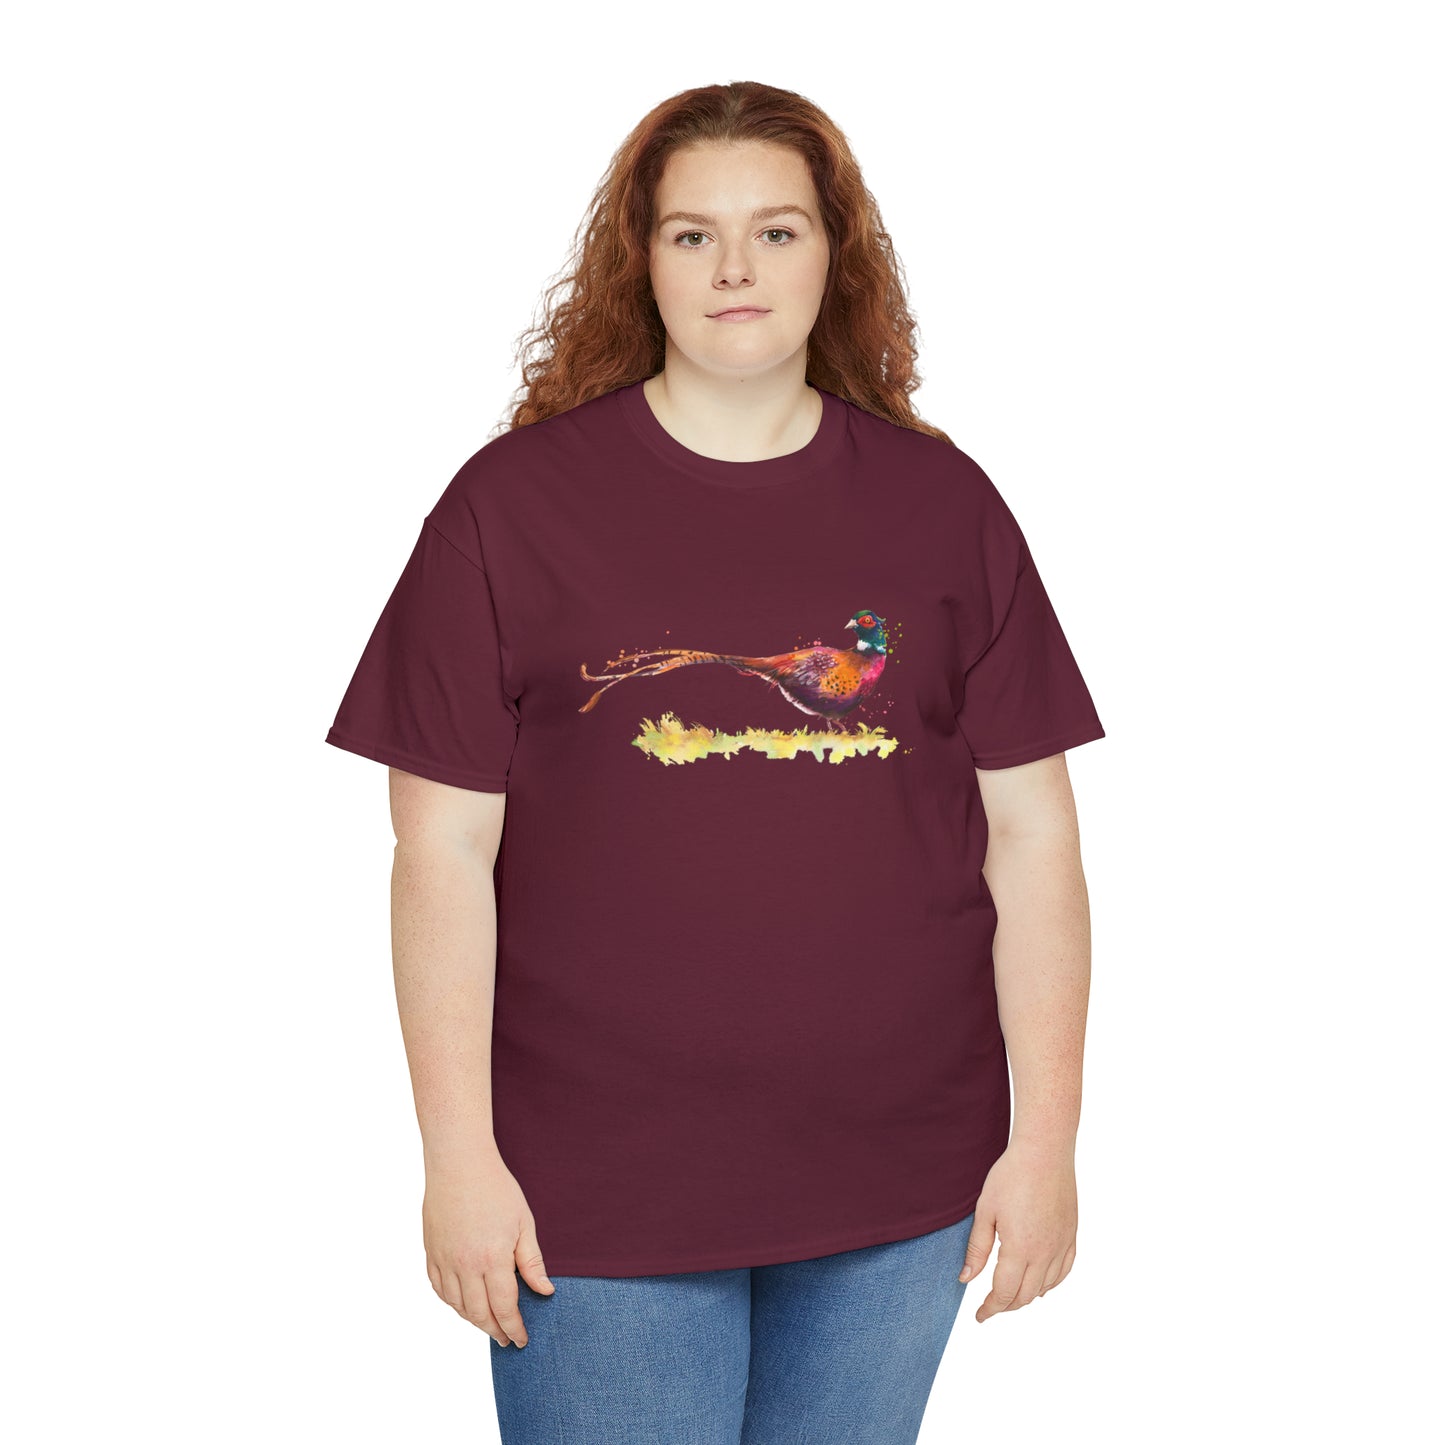 Mock up of a plus-size woman wearing the Maroon shirt